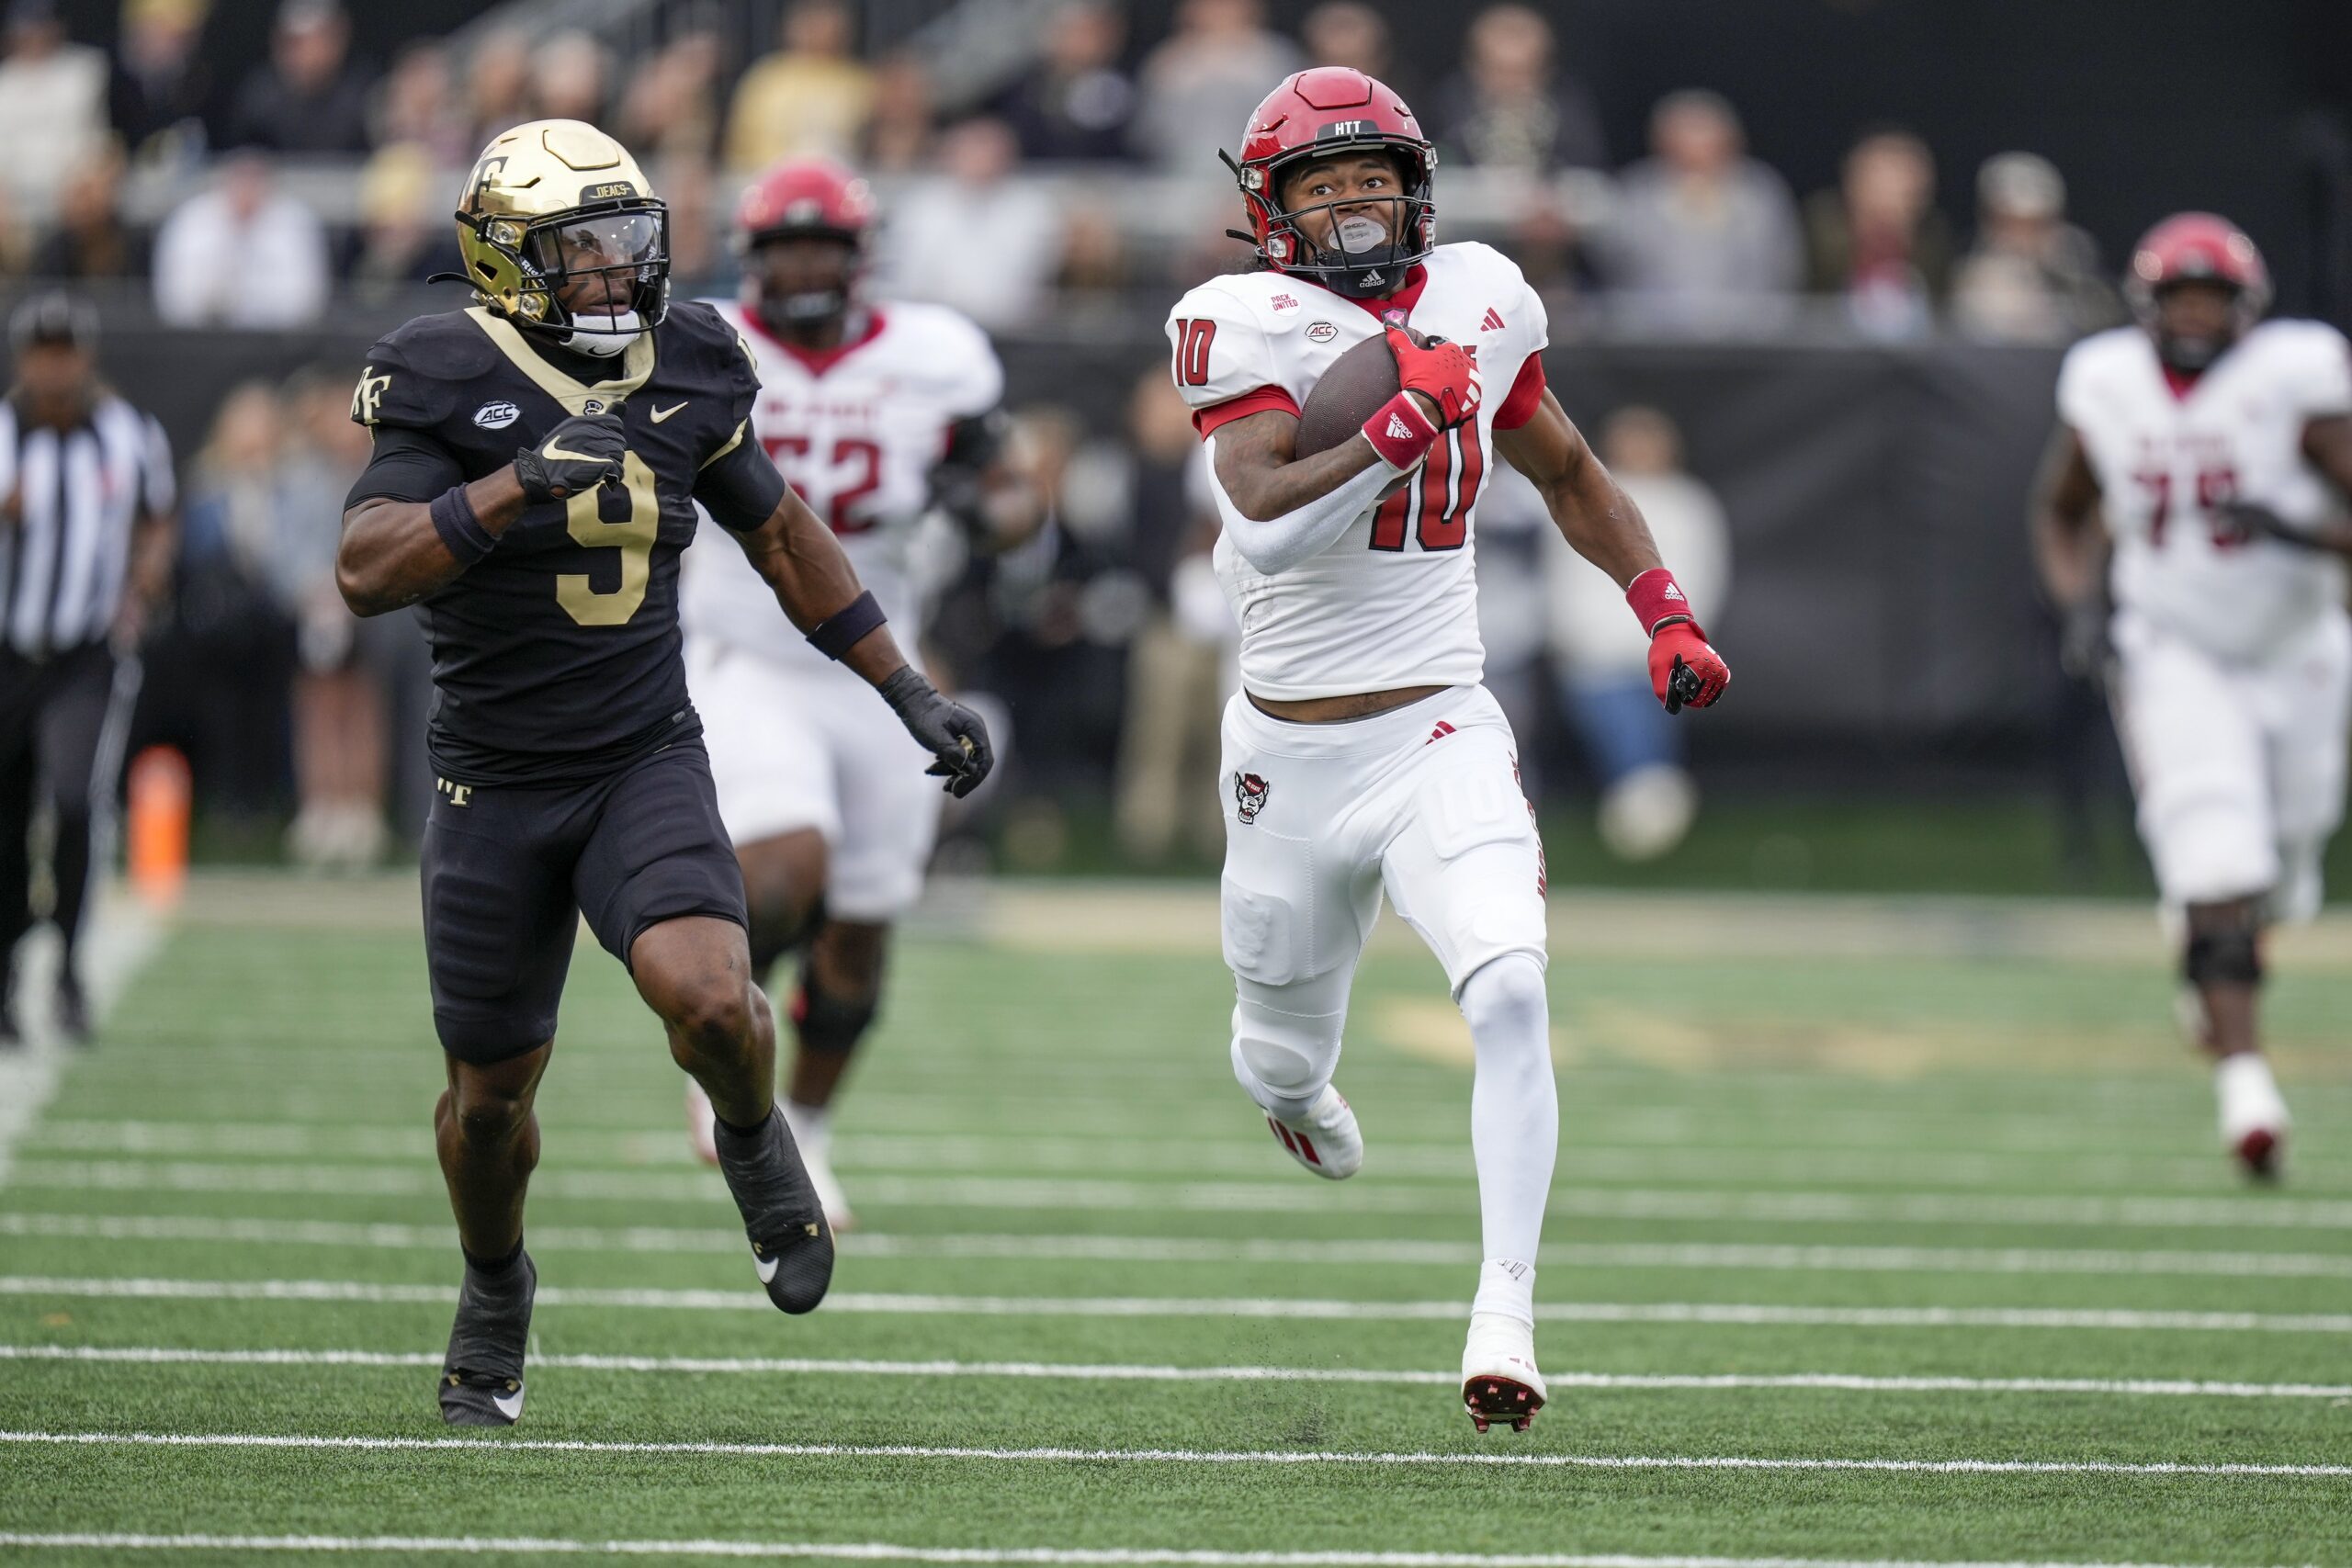 Demon Deacons get embarrassed by the Wolfpack